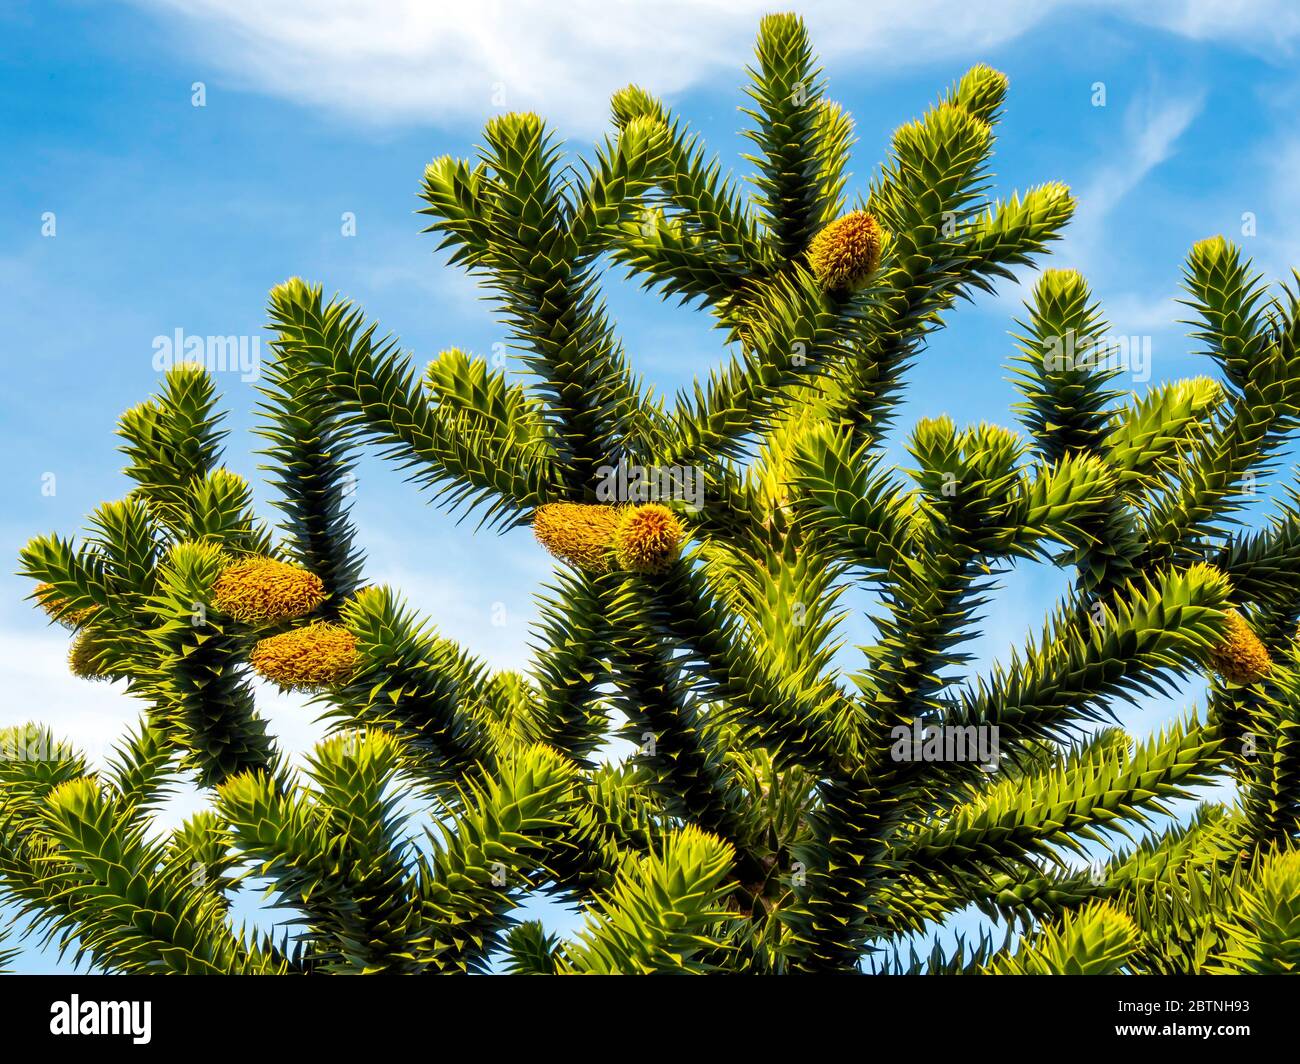 Monkey Puzzle tree Araucaria araucana is a garden tree it is dioecious with trees being either male or female. Brown cones show it to be male Stock Photo